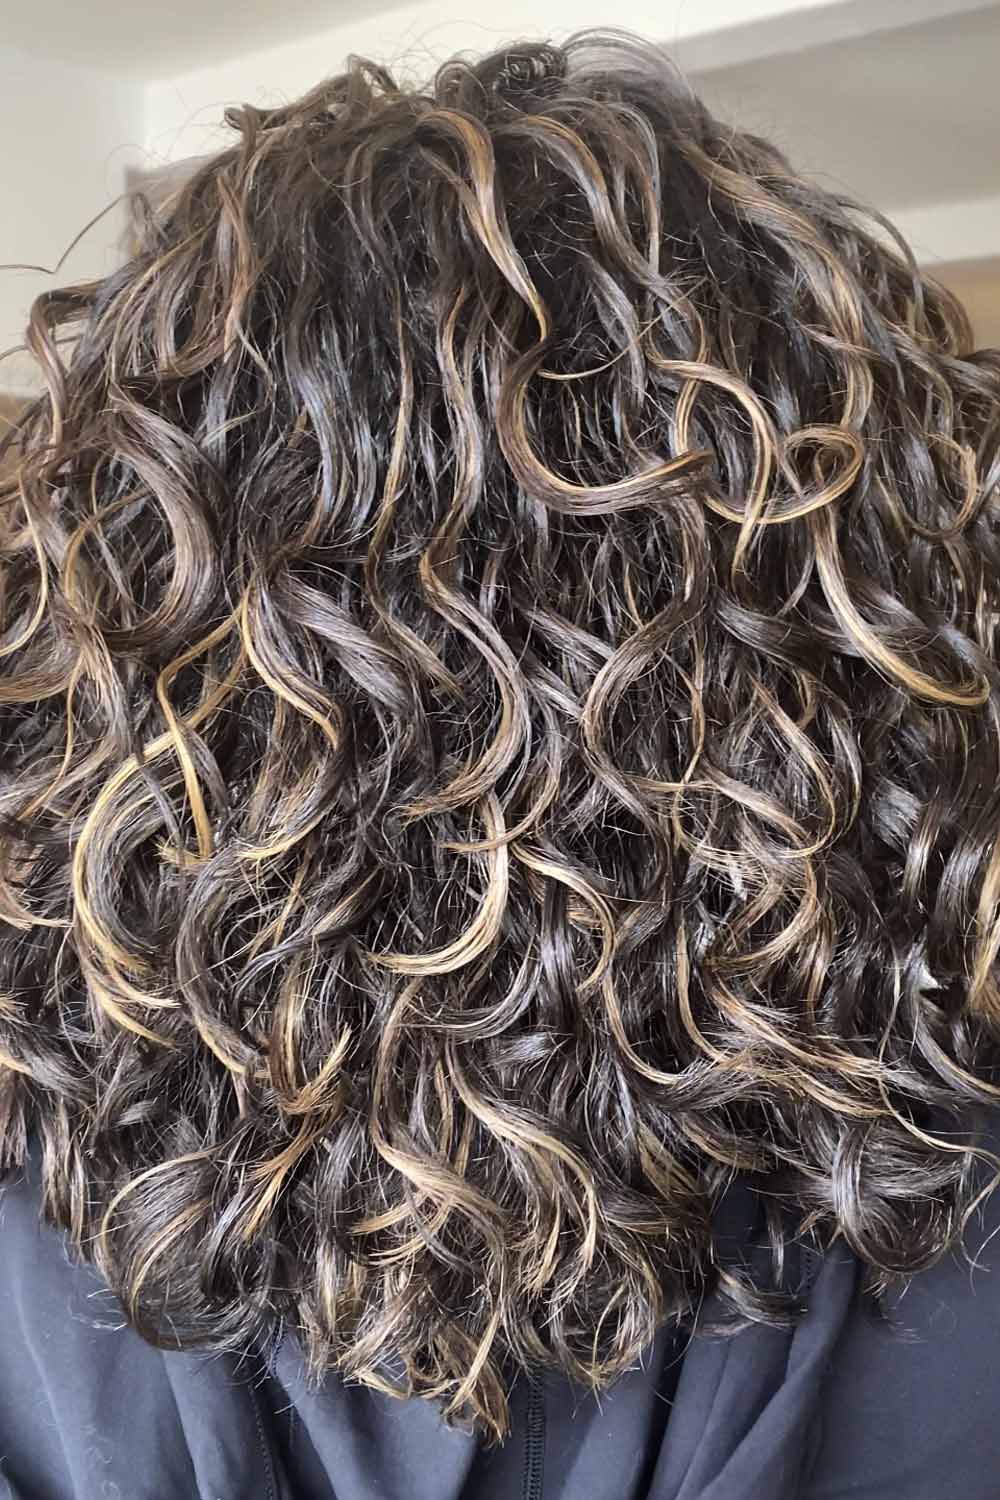 Choose to balayage your curly hair when you desire low-maintenance, lived-in color